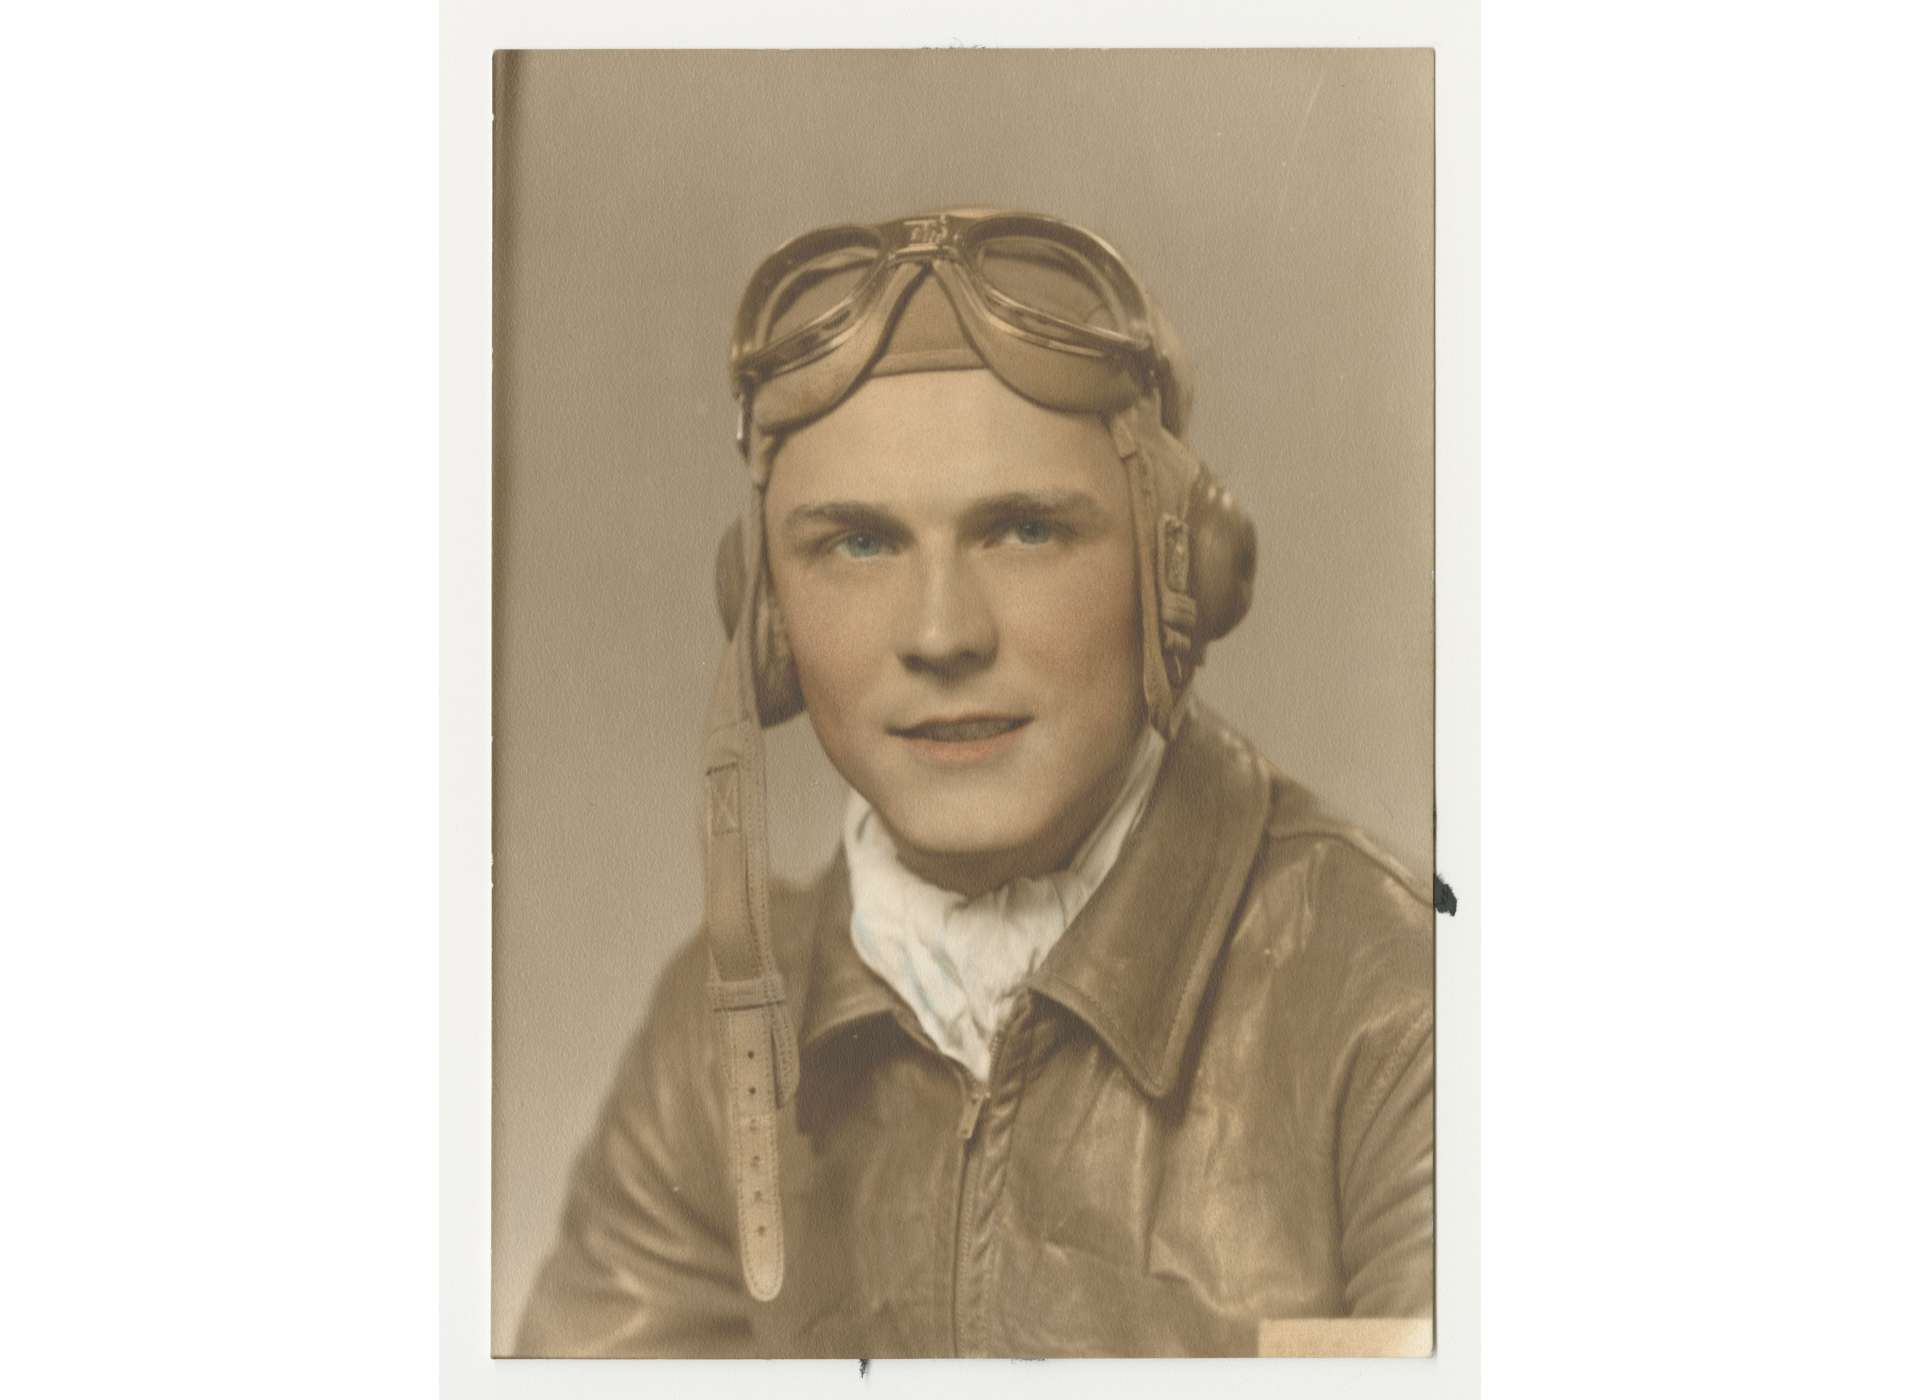 Combat pilot Jack Wilson spent nearly the entire war in the Pacific. Wilson and his crew were lost when their plane went down in Typhoon Ursula in the Philippine Sea, weeks after Japan’s surrender. The National WWII Museum, Gift in memory of Col. Jack A. Wilson, 2016.087.